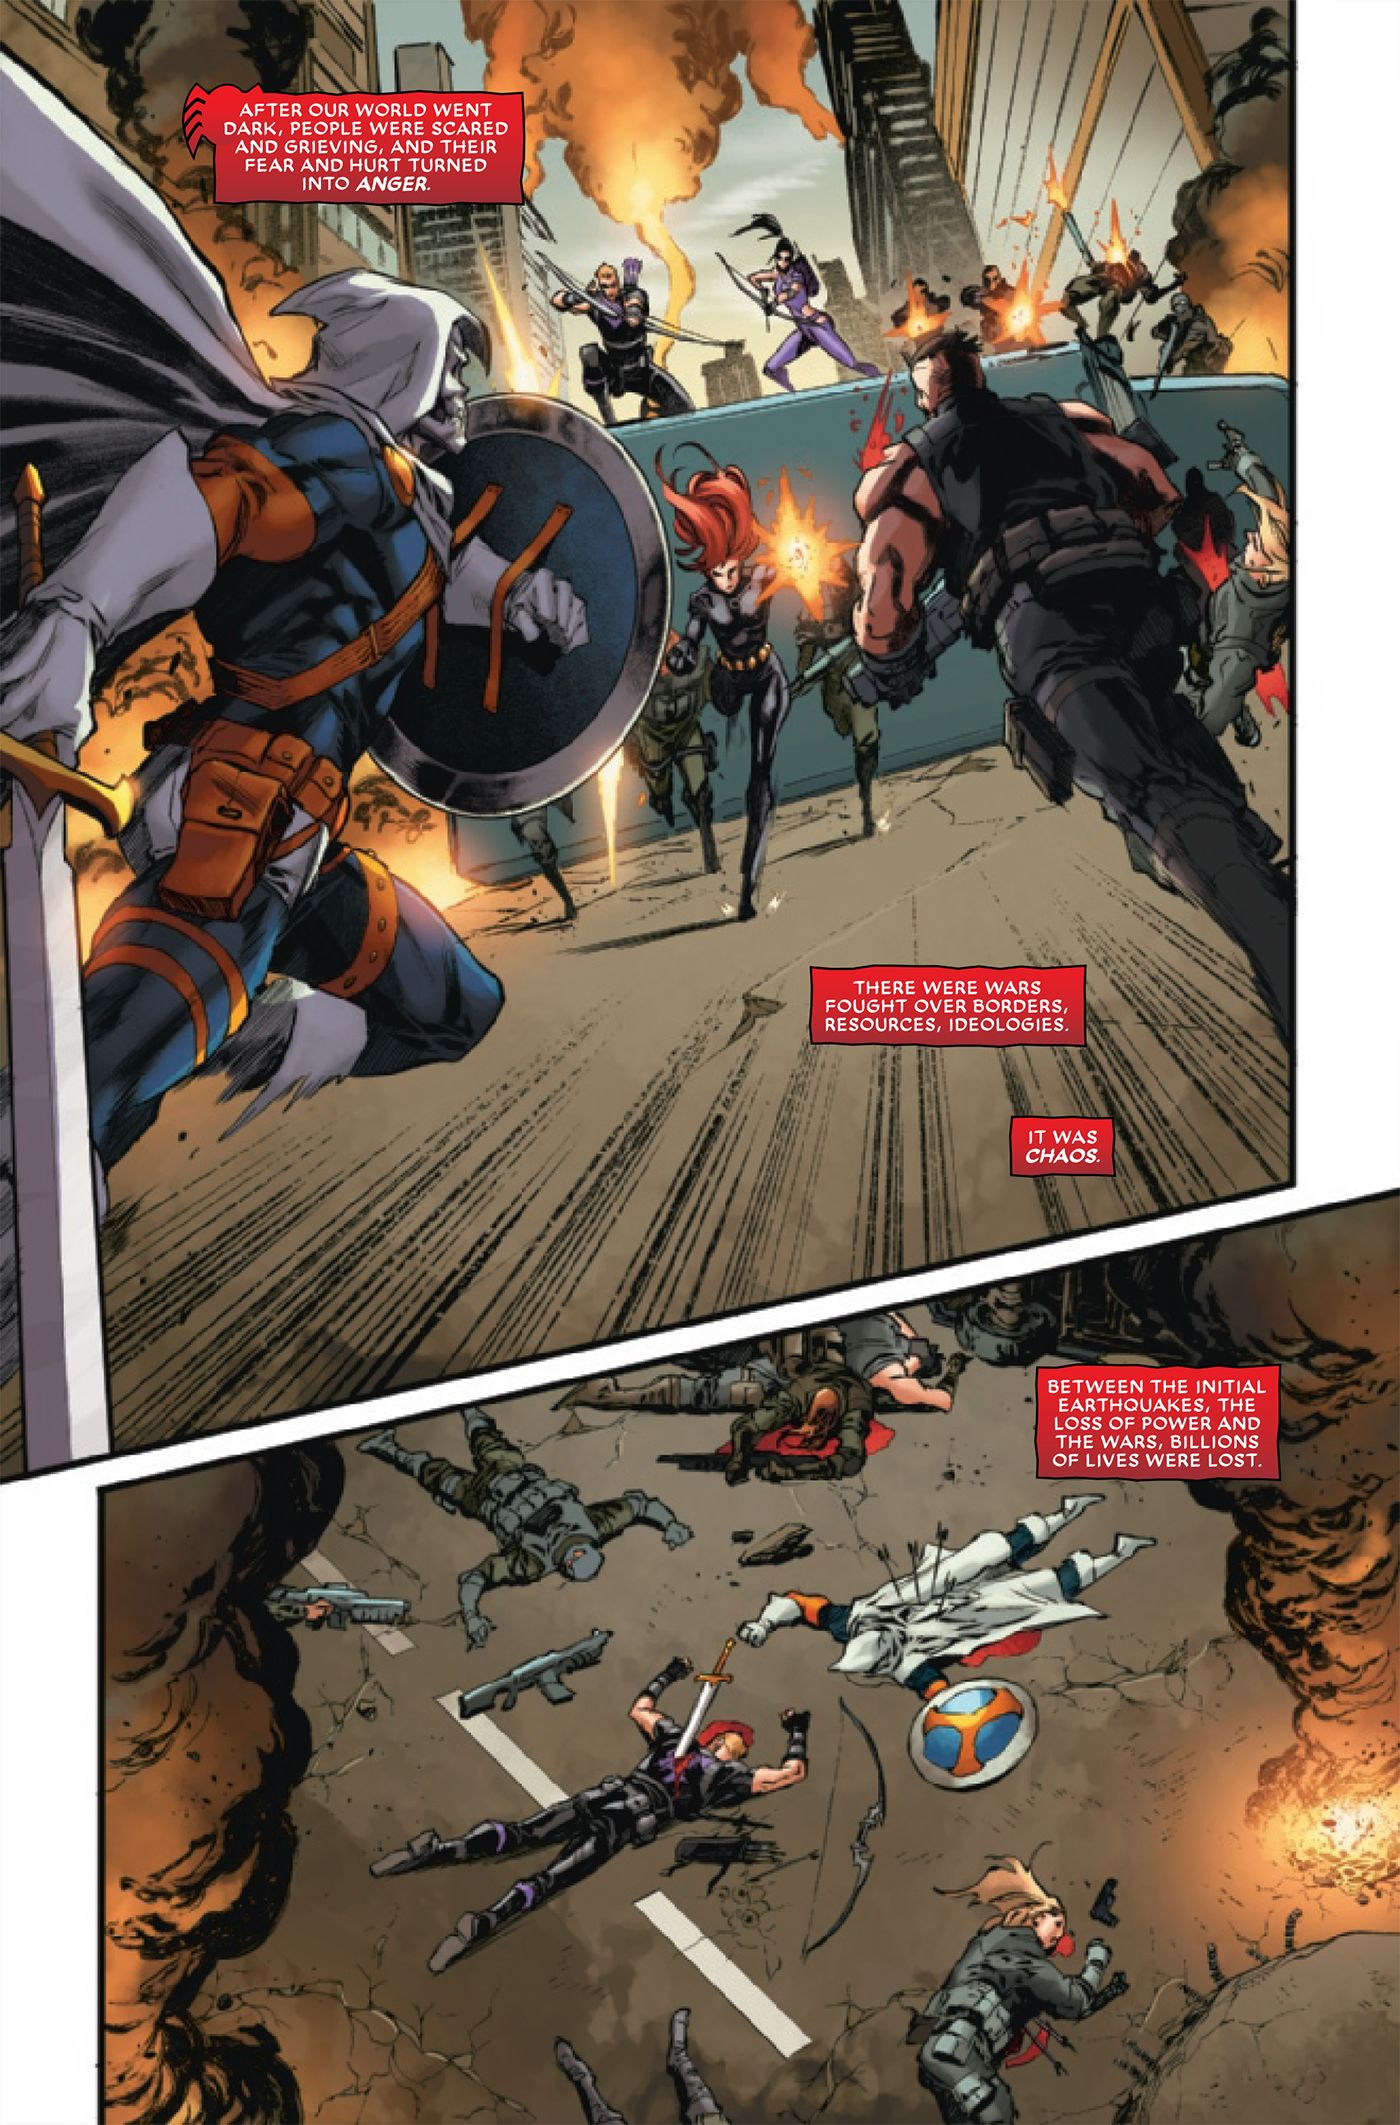 Heroes and villains fight, with Hawkeye and Taskmaster killed.